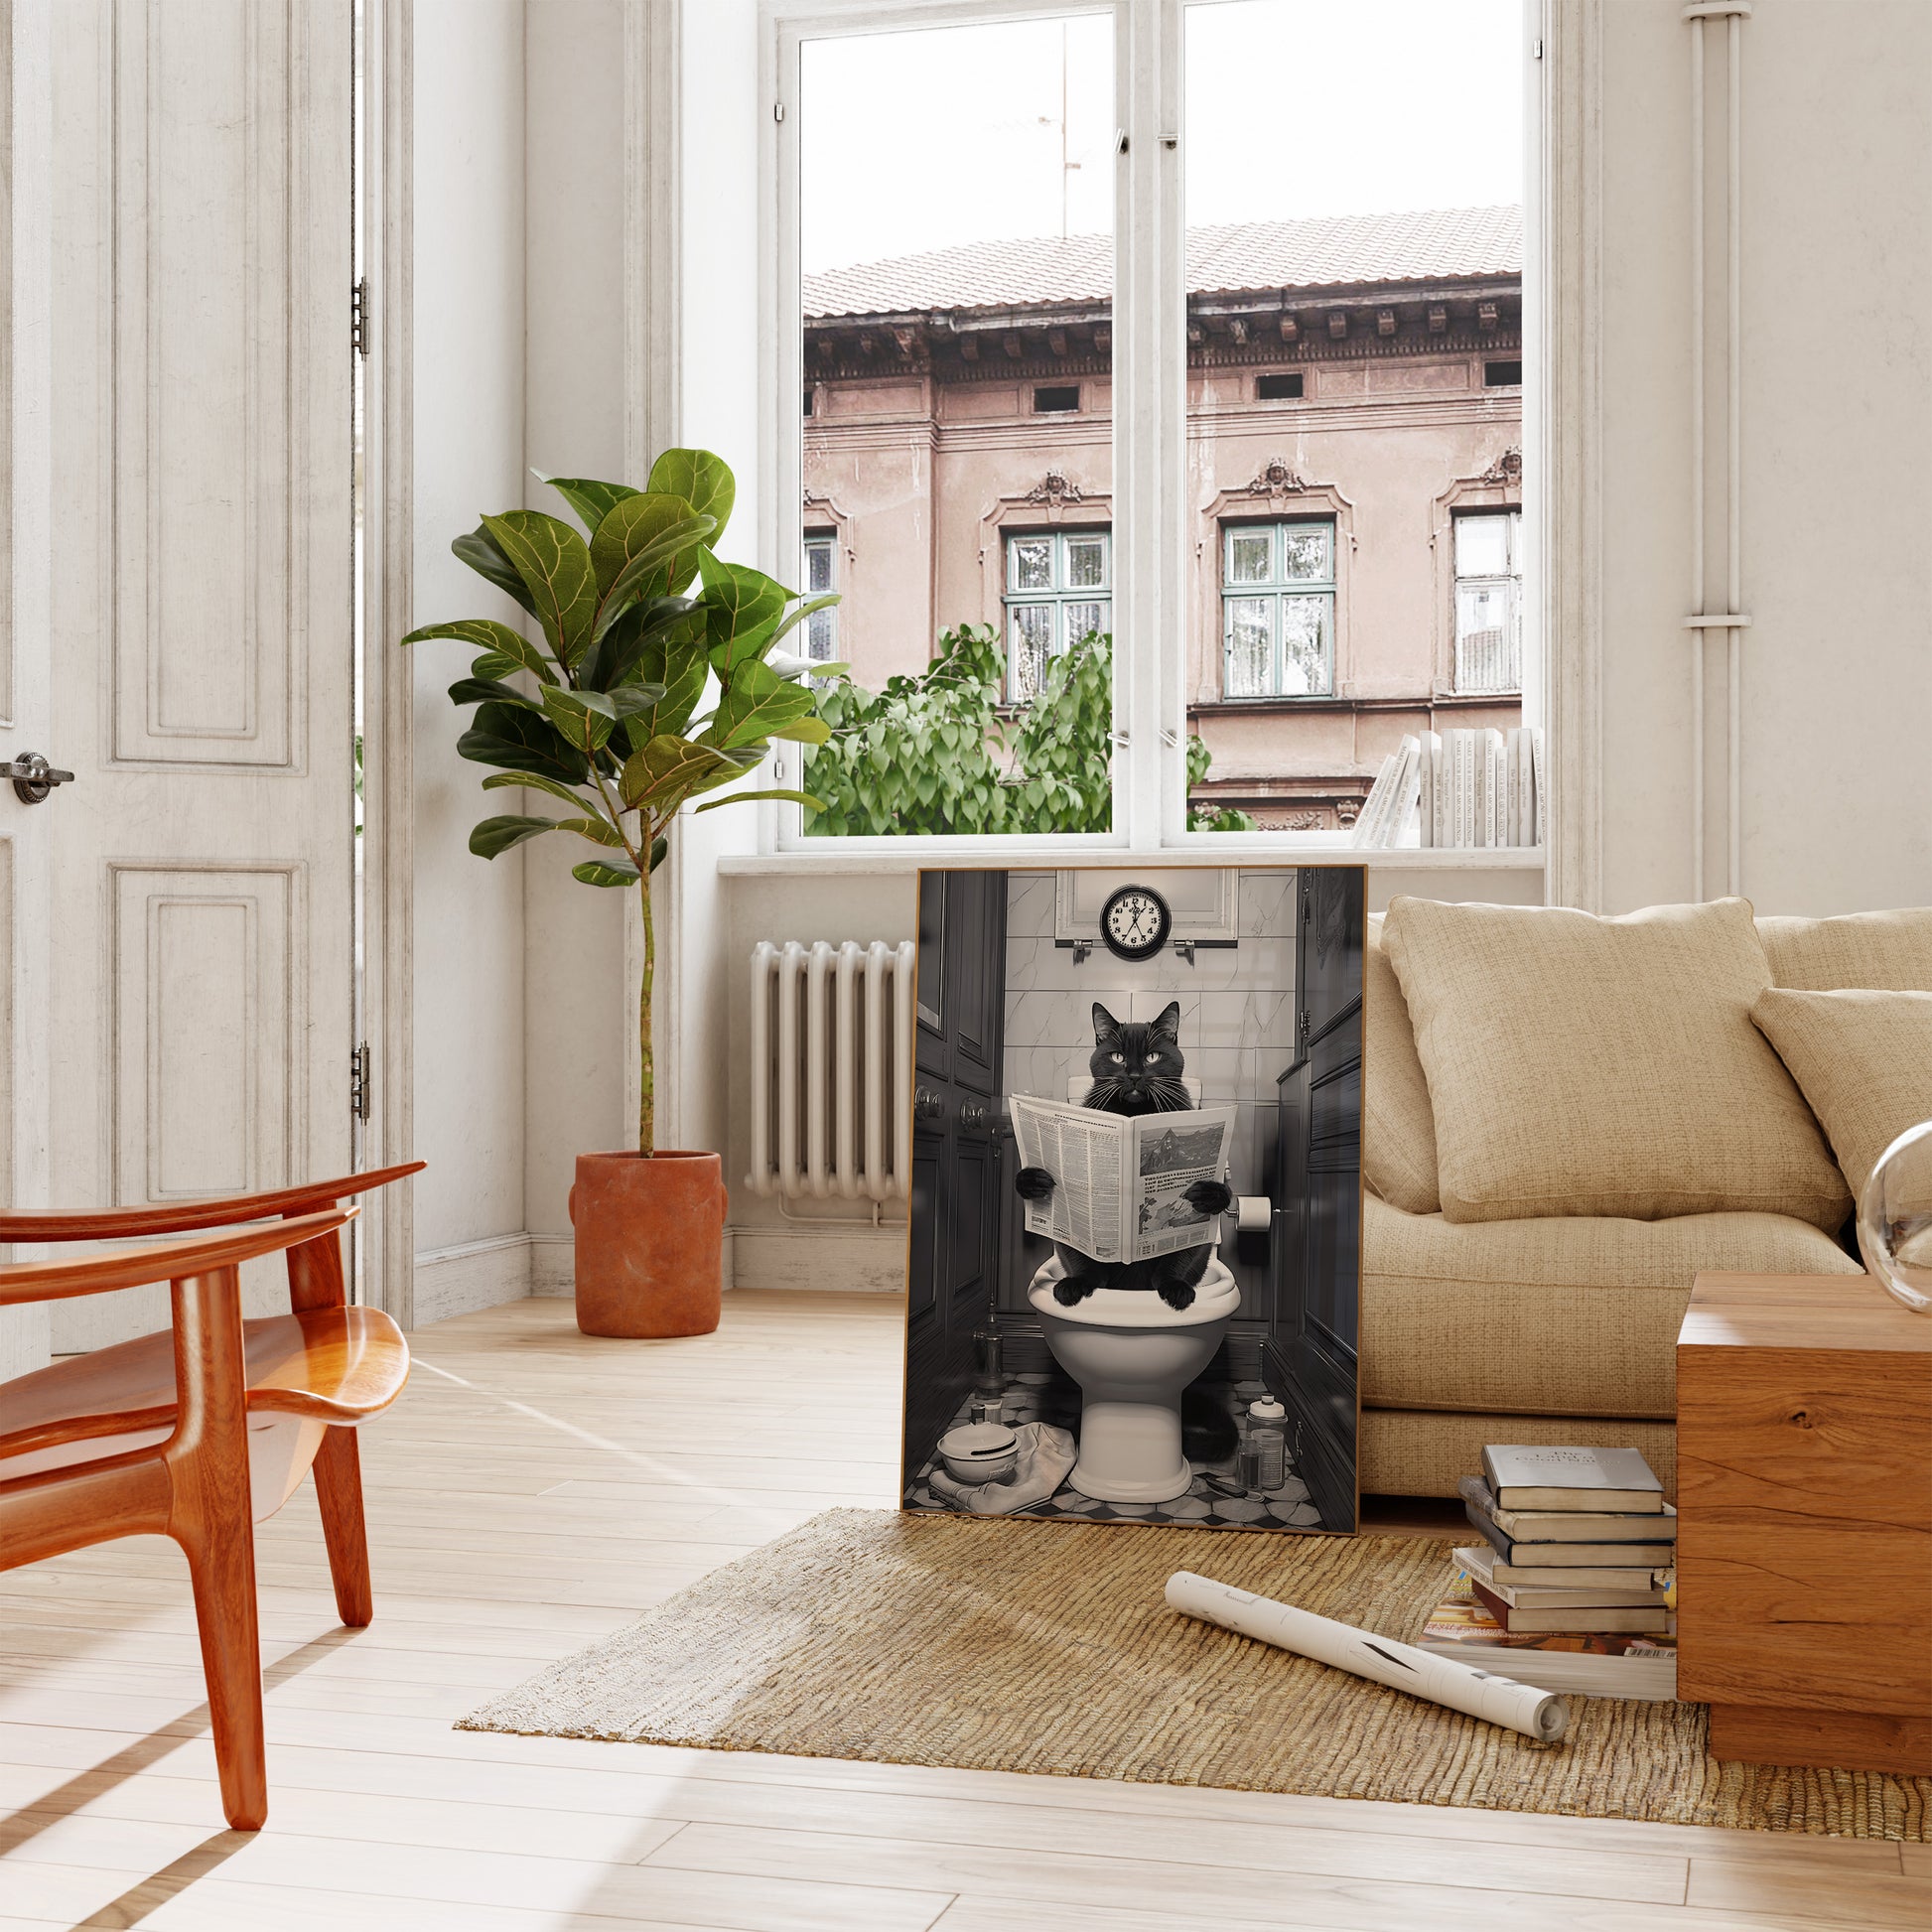 A spacious living room with a couch, wooden chair, and a humorous poster of a cat reading on a toilet.